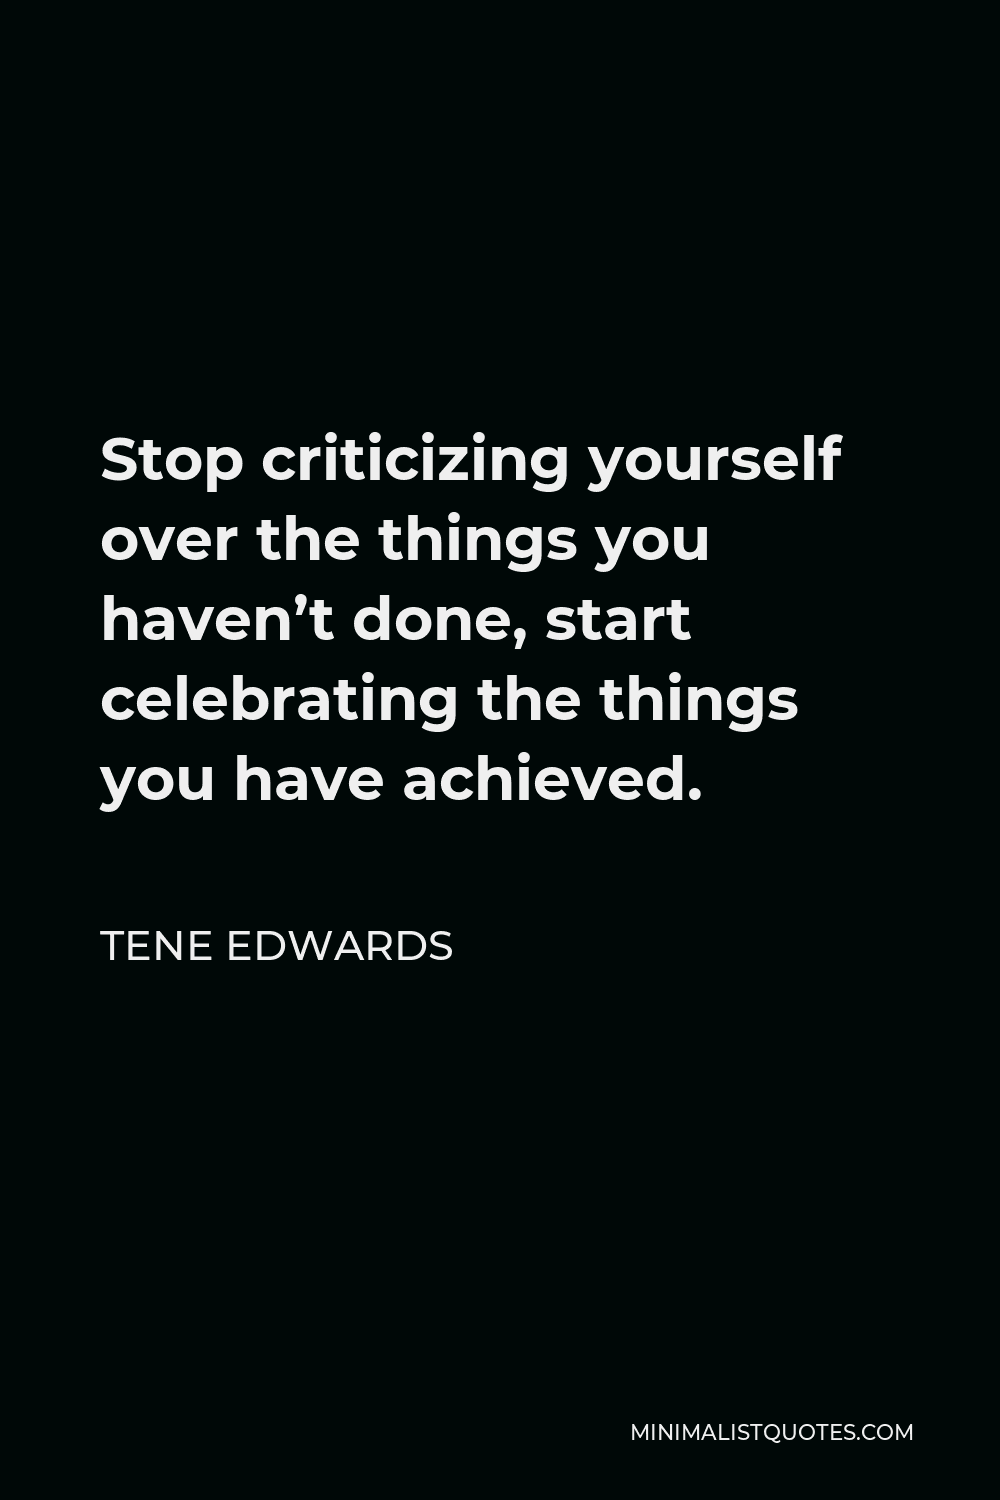 Tene Edwards Quote - Stop criticizing yourself over the things you haven’t done, start celebrating the things you have achieved.